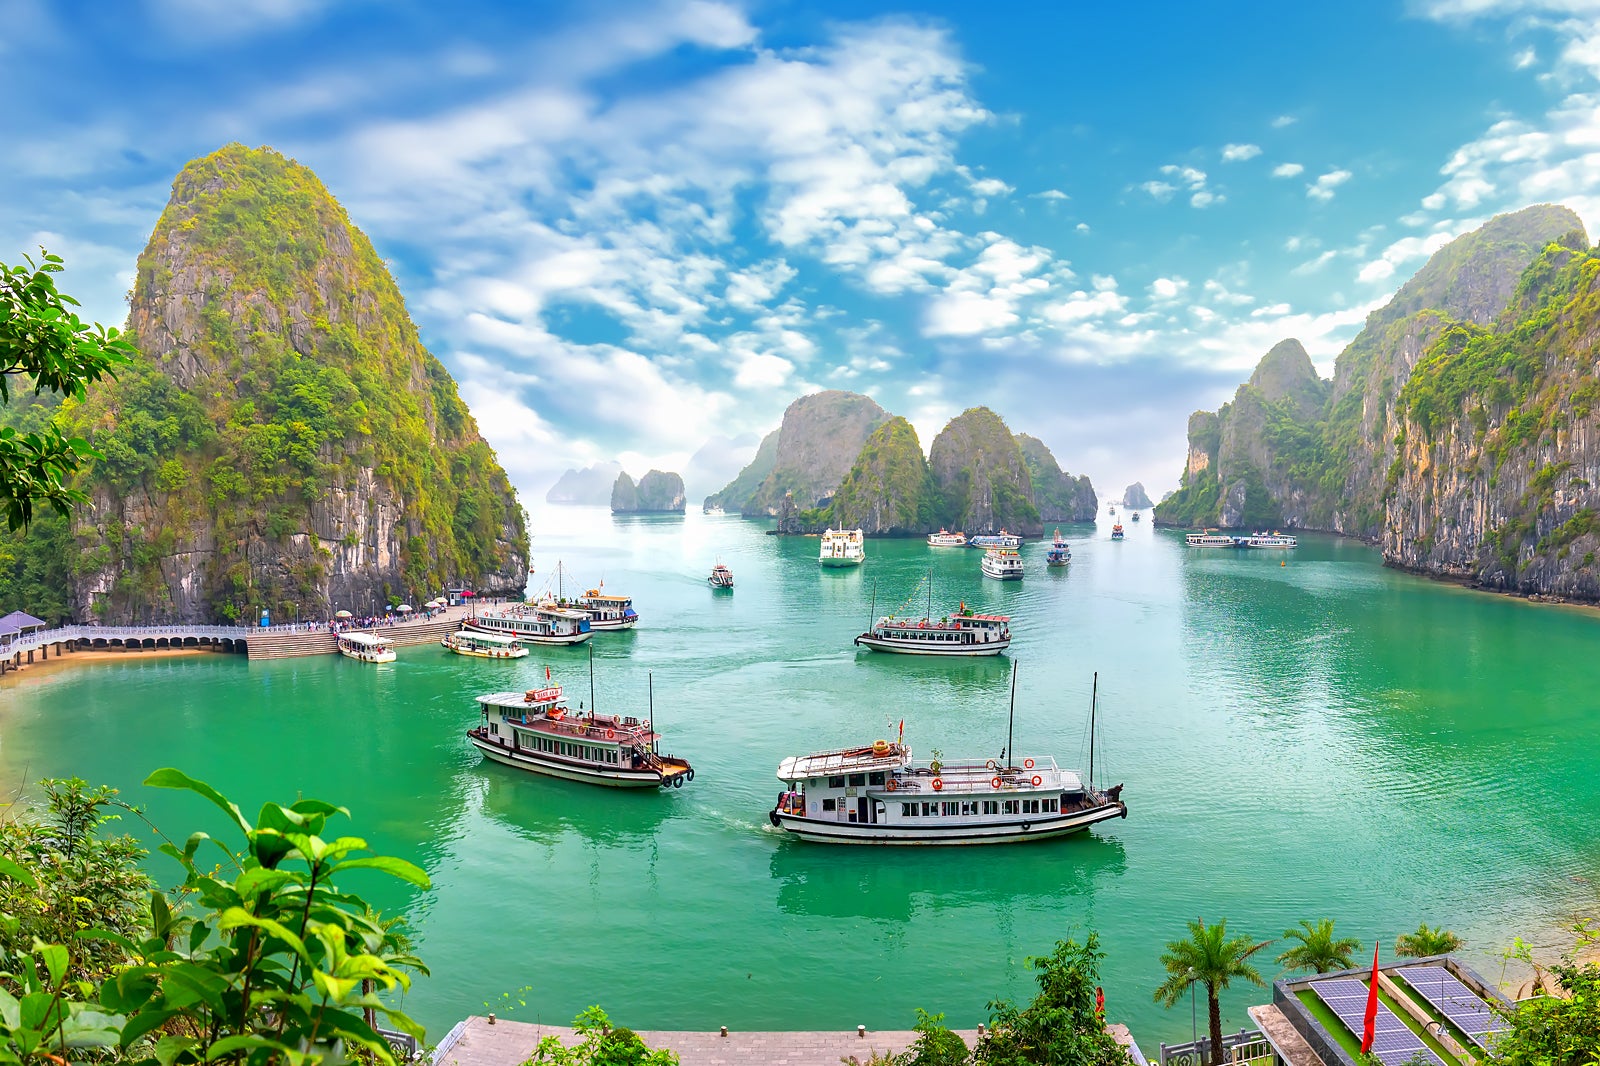 Ha Long Bay Cruises - Everything You Need to Know About Cruising in Halong Bay